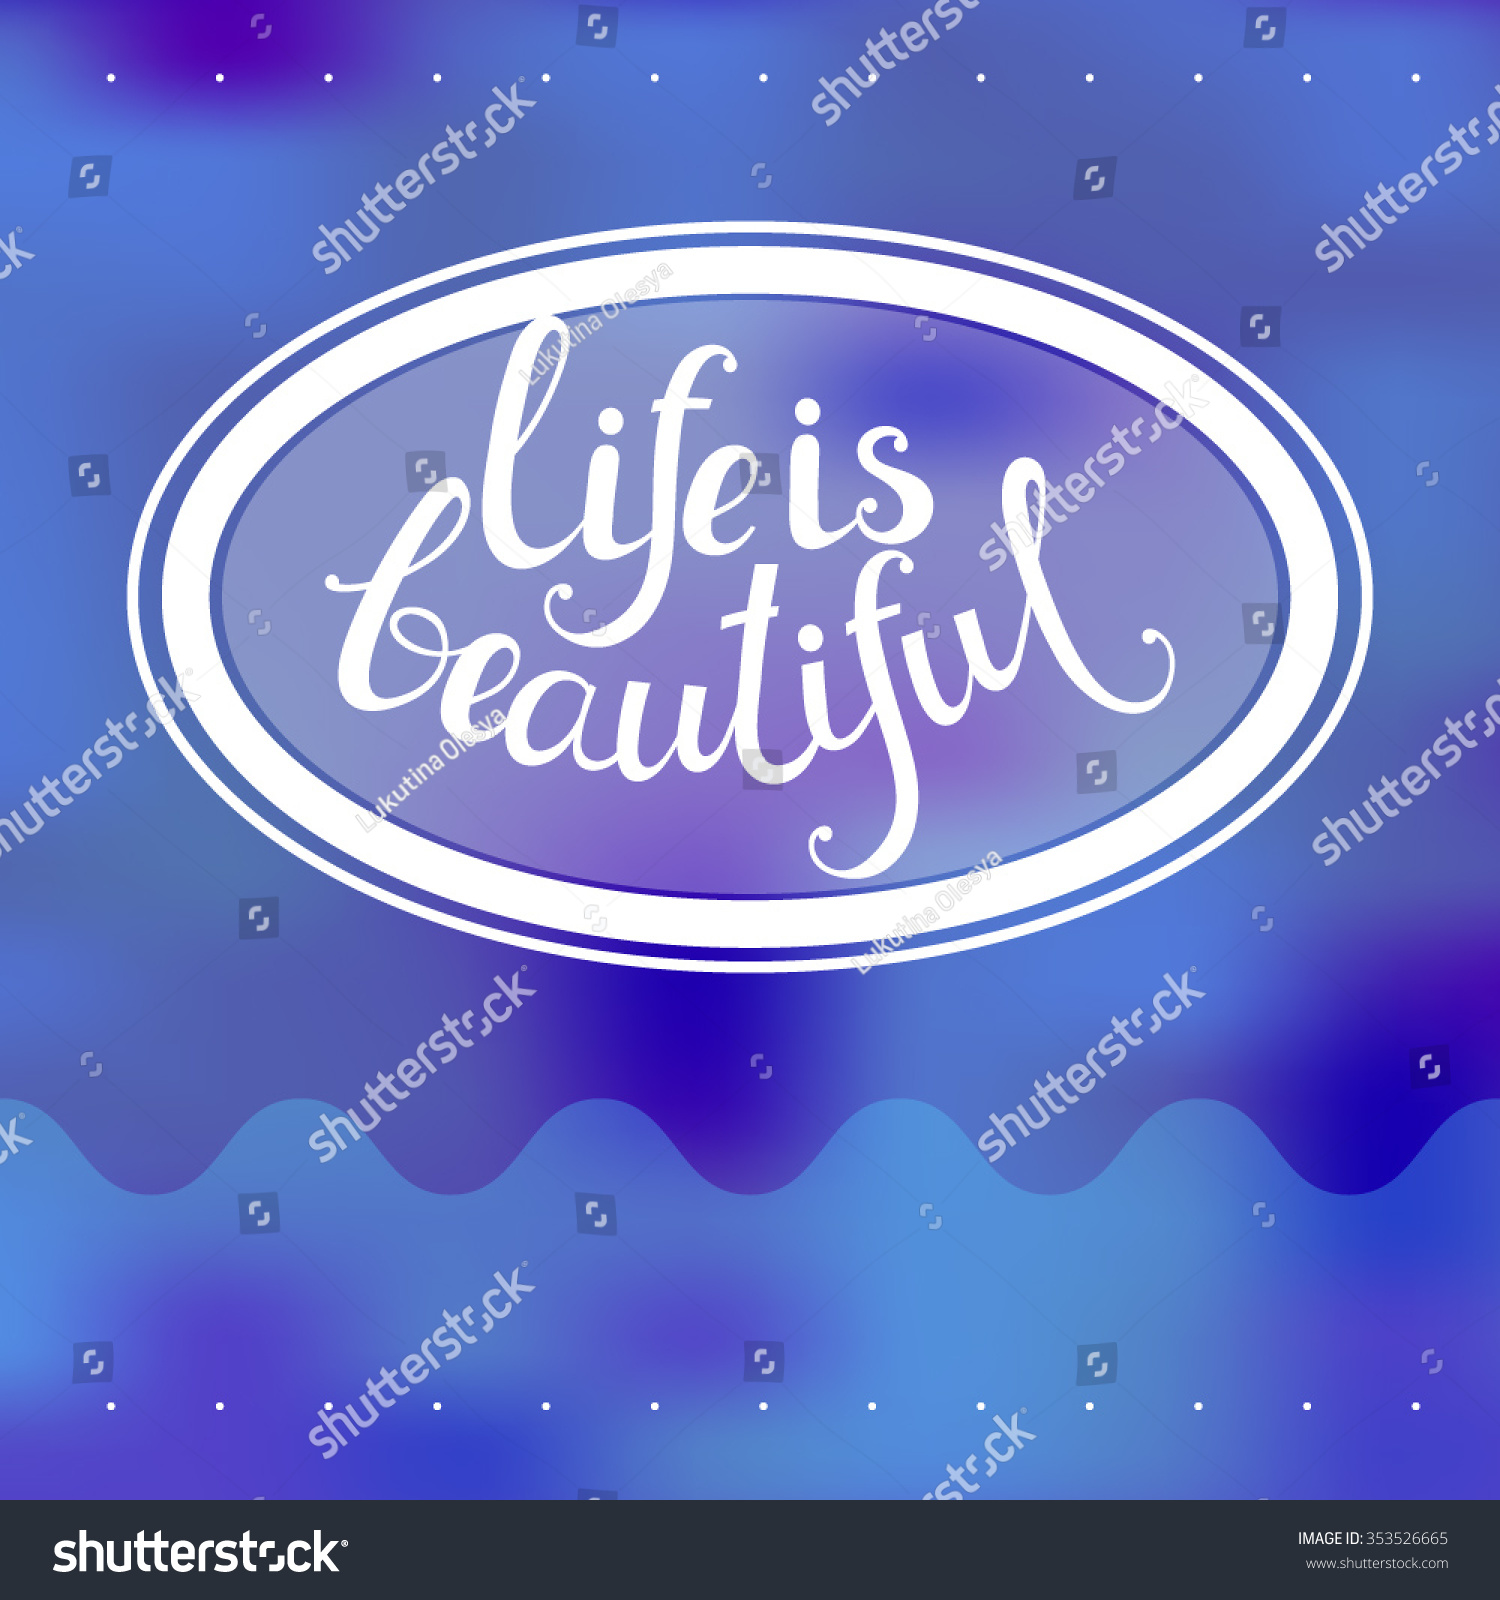 Positive Life quotes Life is beautiful Hand drawn calligraphic inscriptions on the blurred background